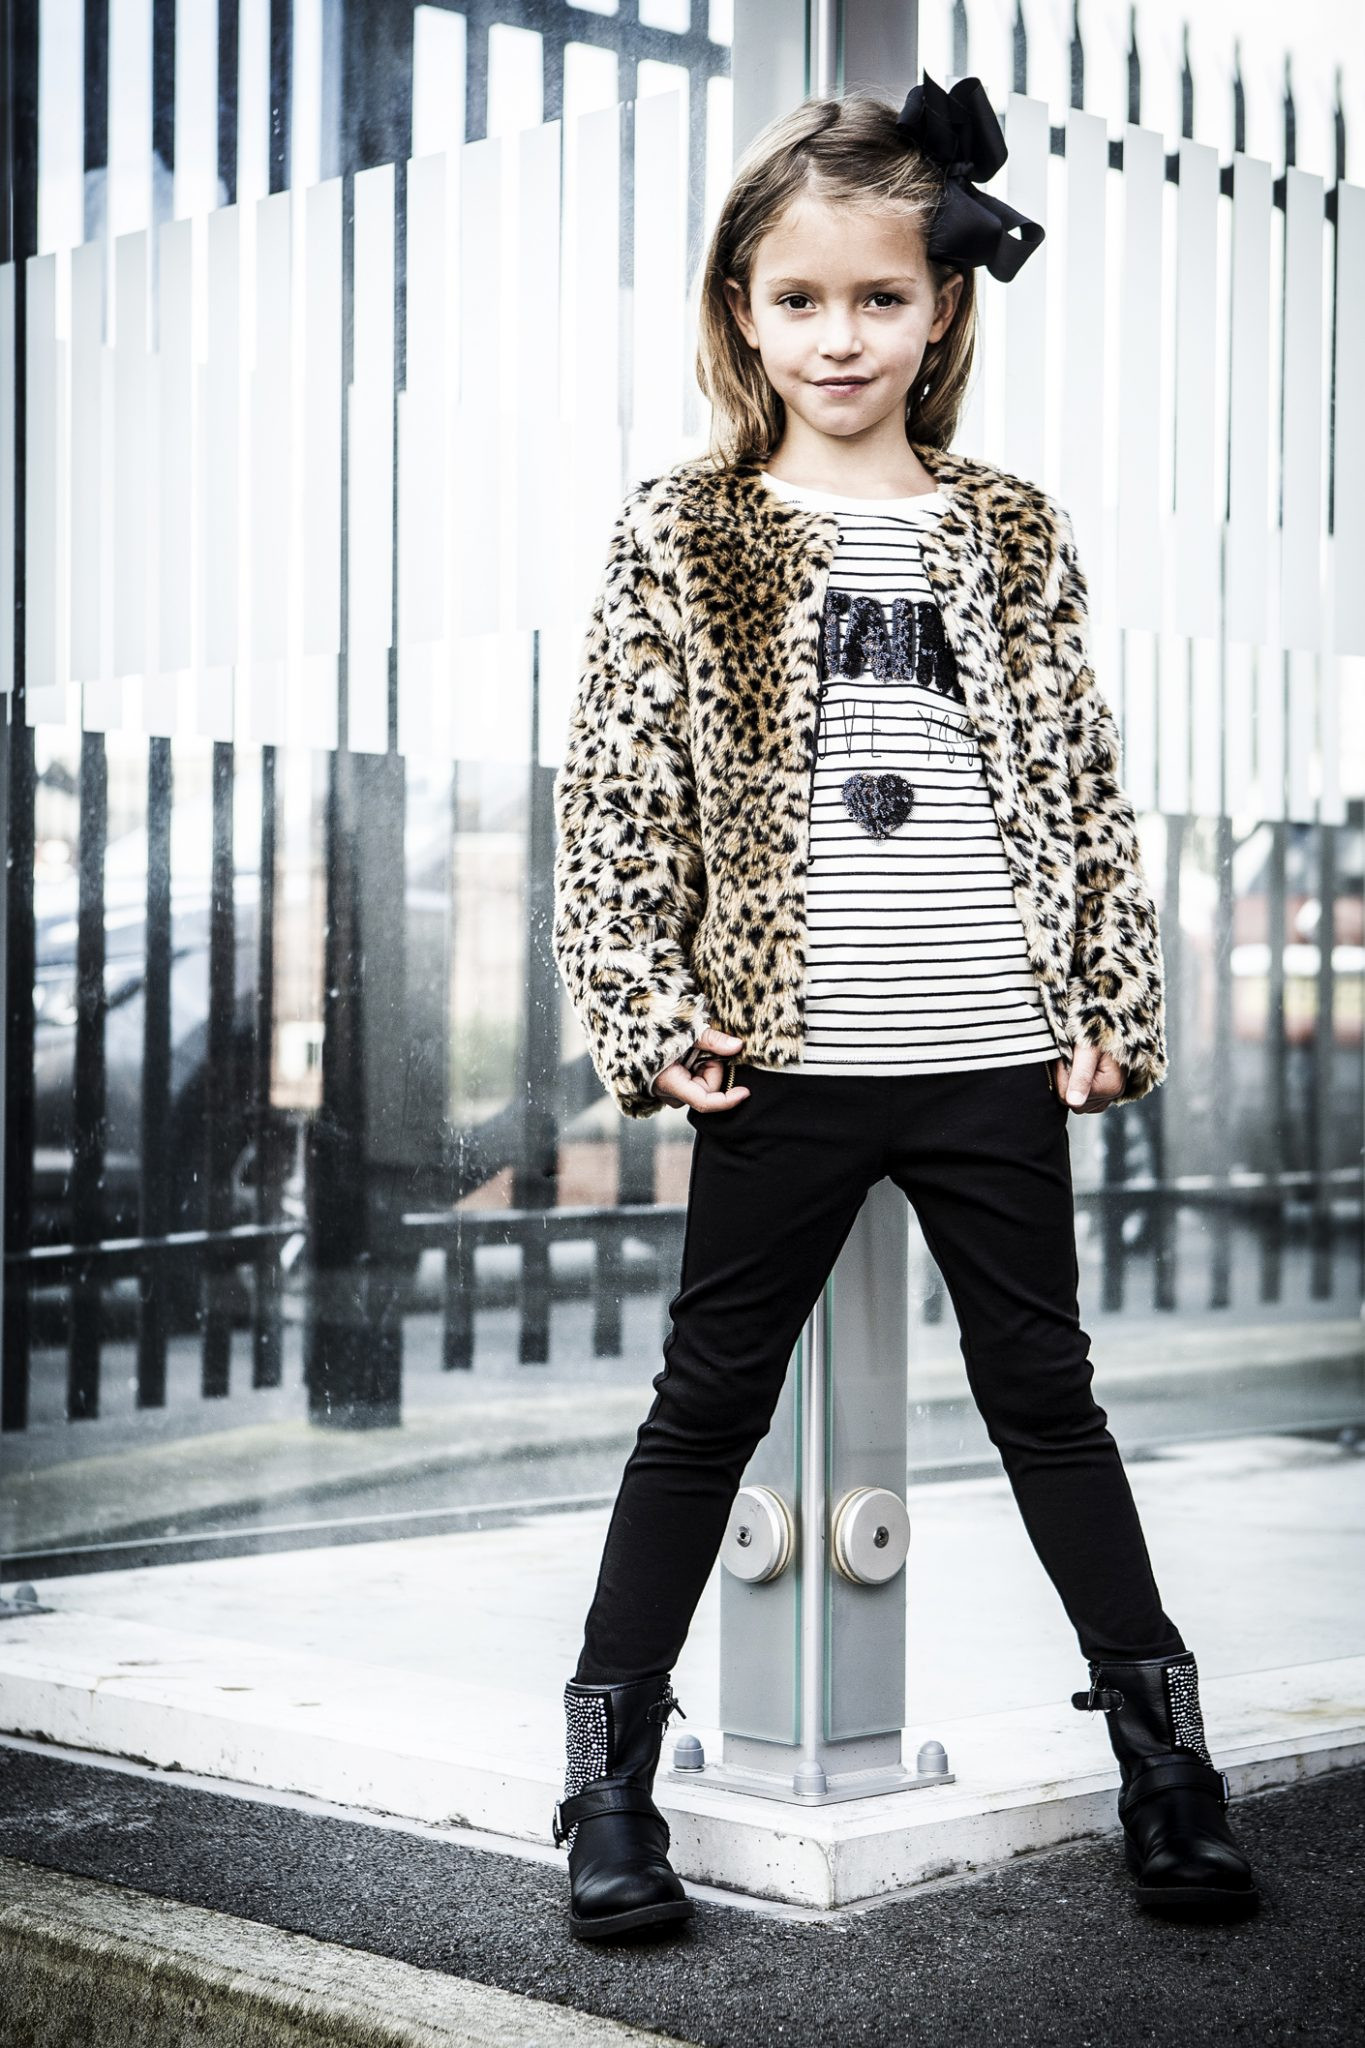 Children Fashion Photography
 kids fashion photography shot on location in Manchester